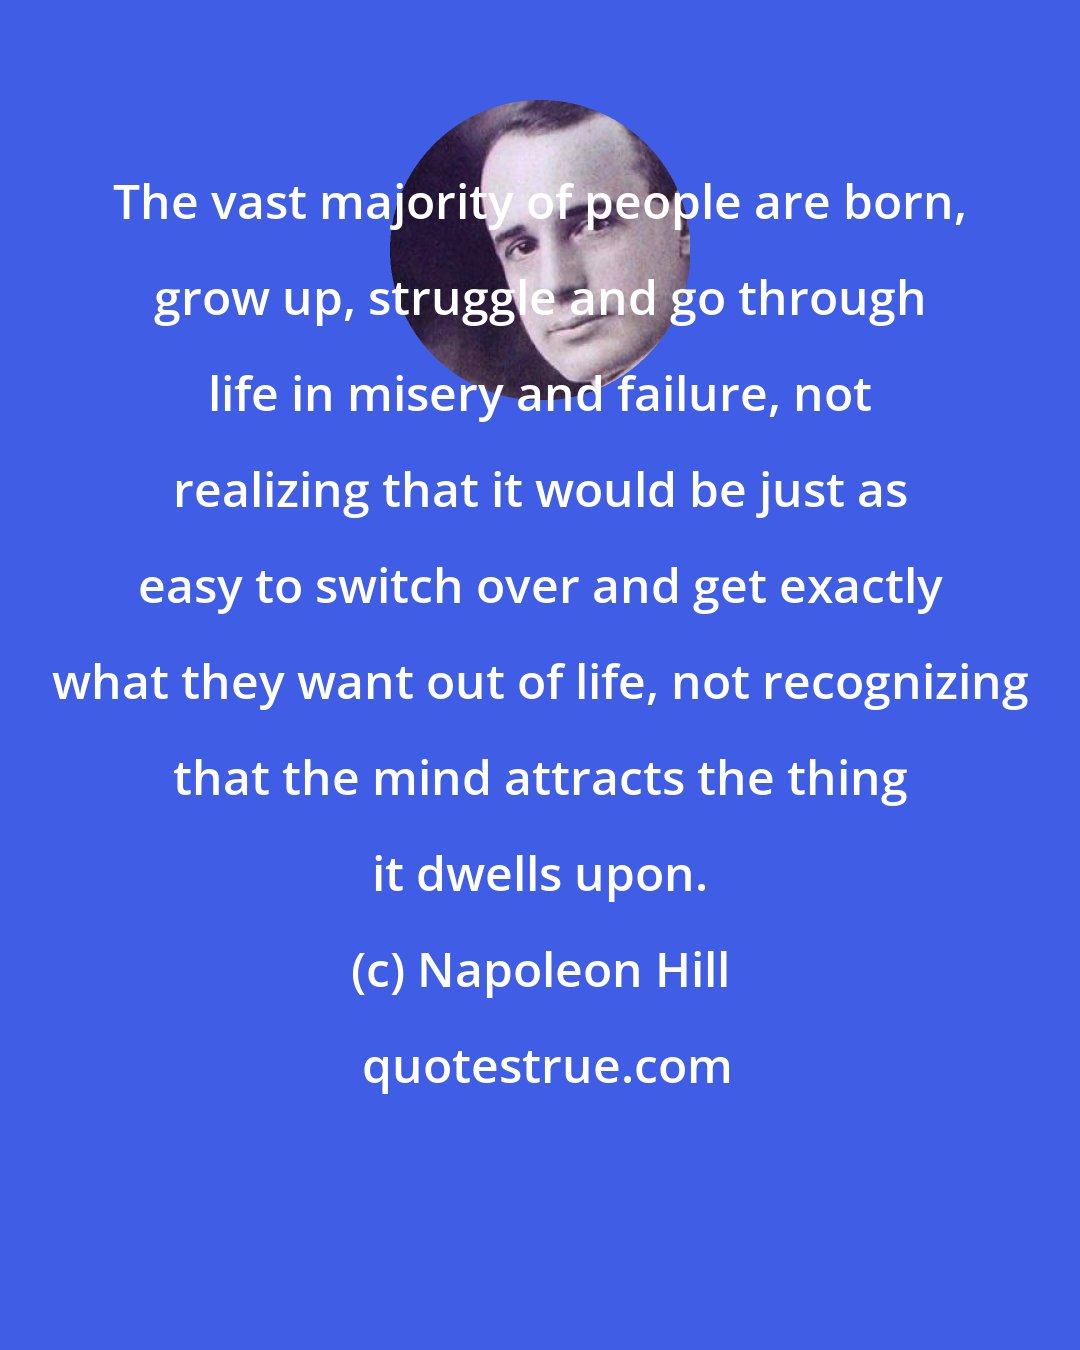 Napoleon Hill: The vast majority of people are born, grow up, struggle and go through life in misery and failure, not realizing that it would be just as easy to switch over and get exactly what they want out of life, not recognizing that the mind attracts the thing it dwells upon.